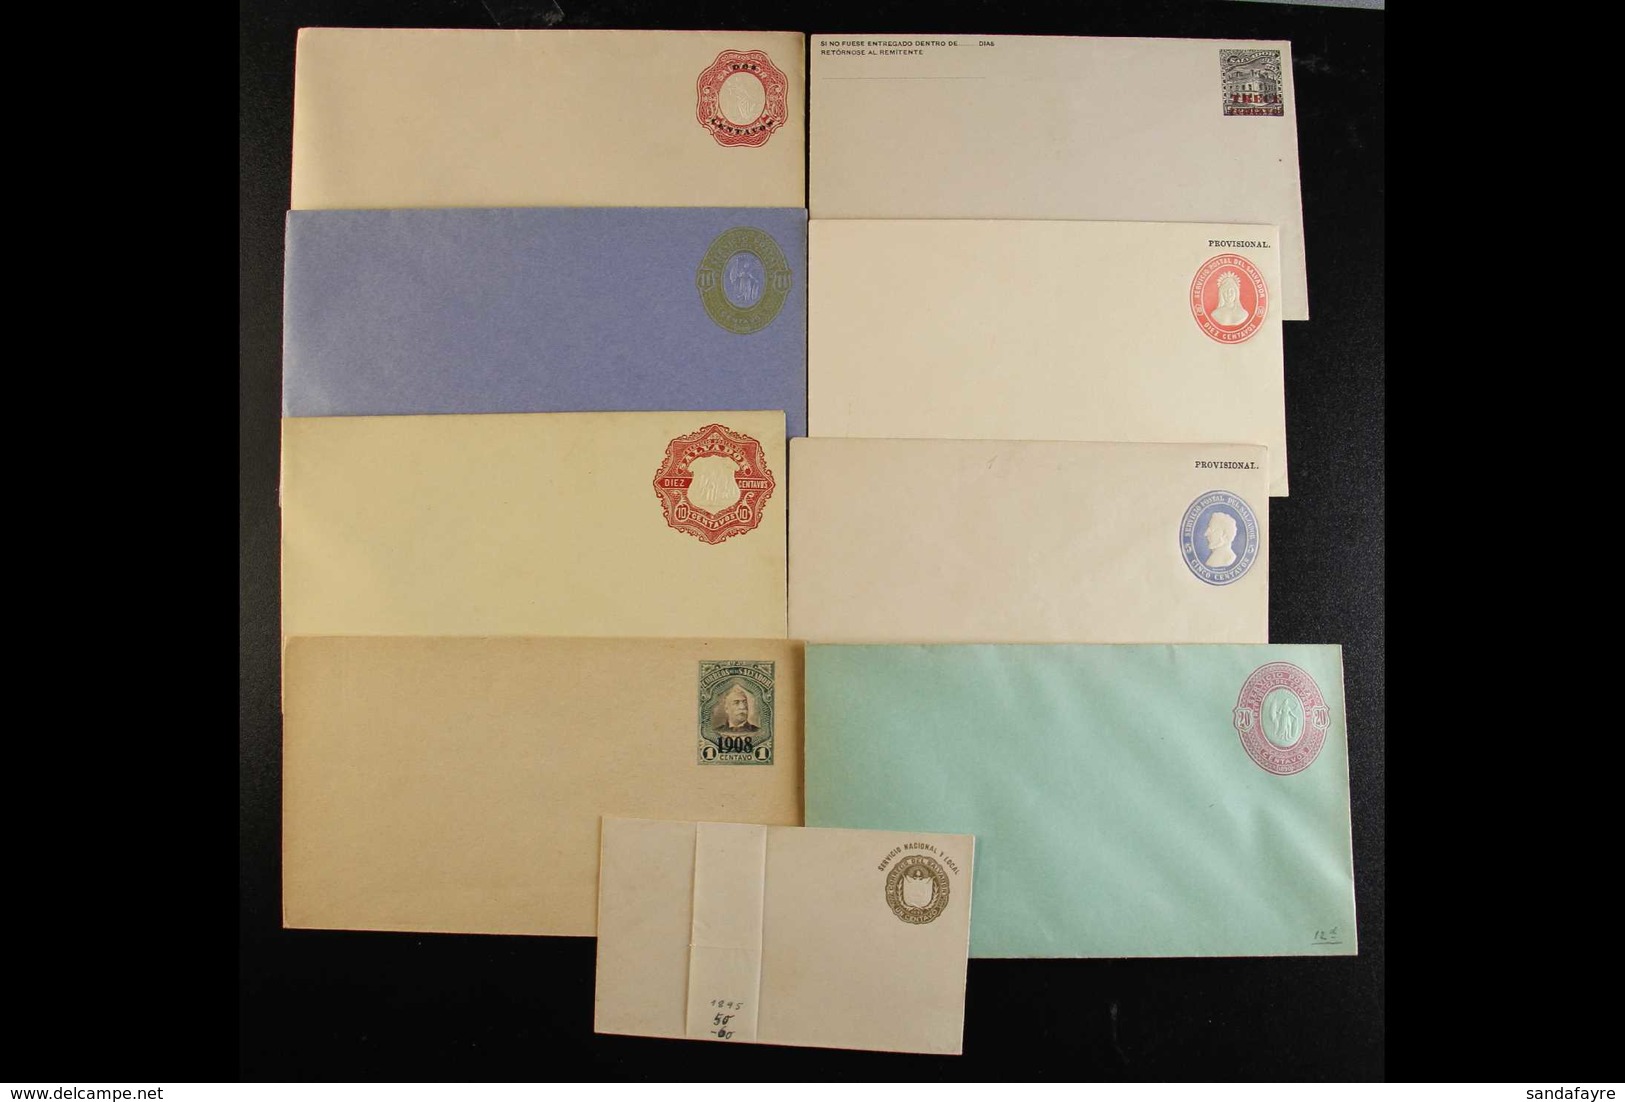 1887-1912 POSTAL STATIONERY Unused Range Of ENVELOPES With A Good Range Of Issued Types, Different Denominations And Siz - El Salvador